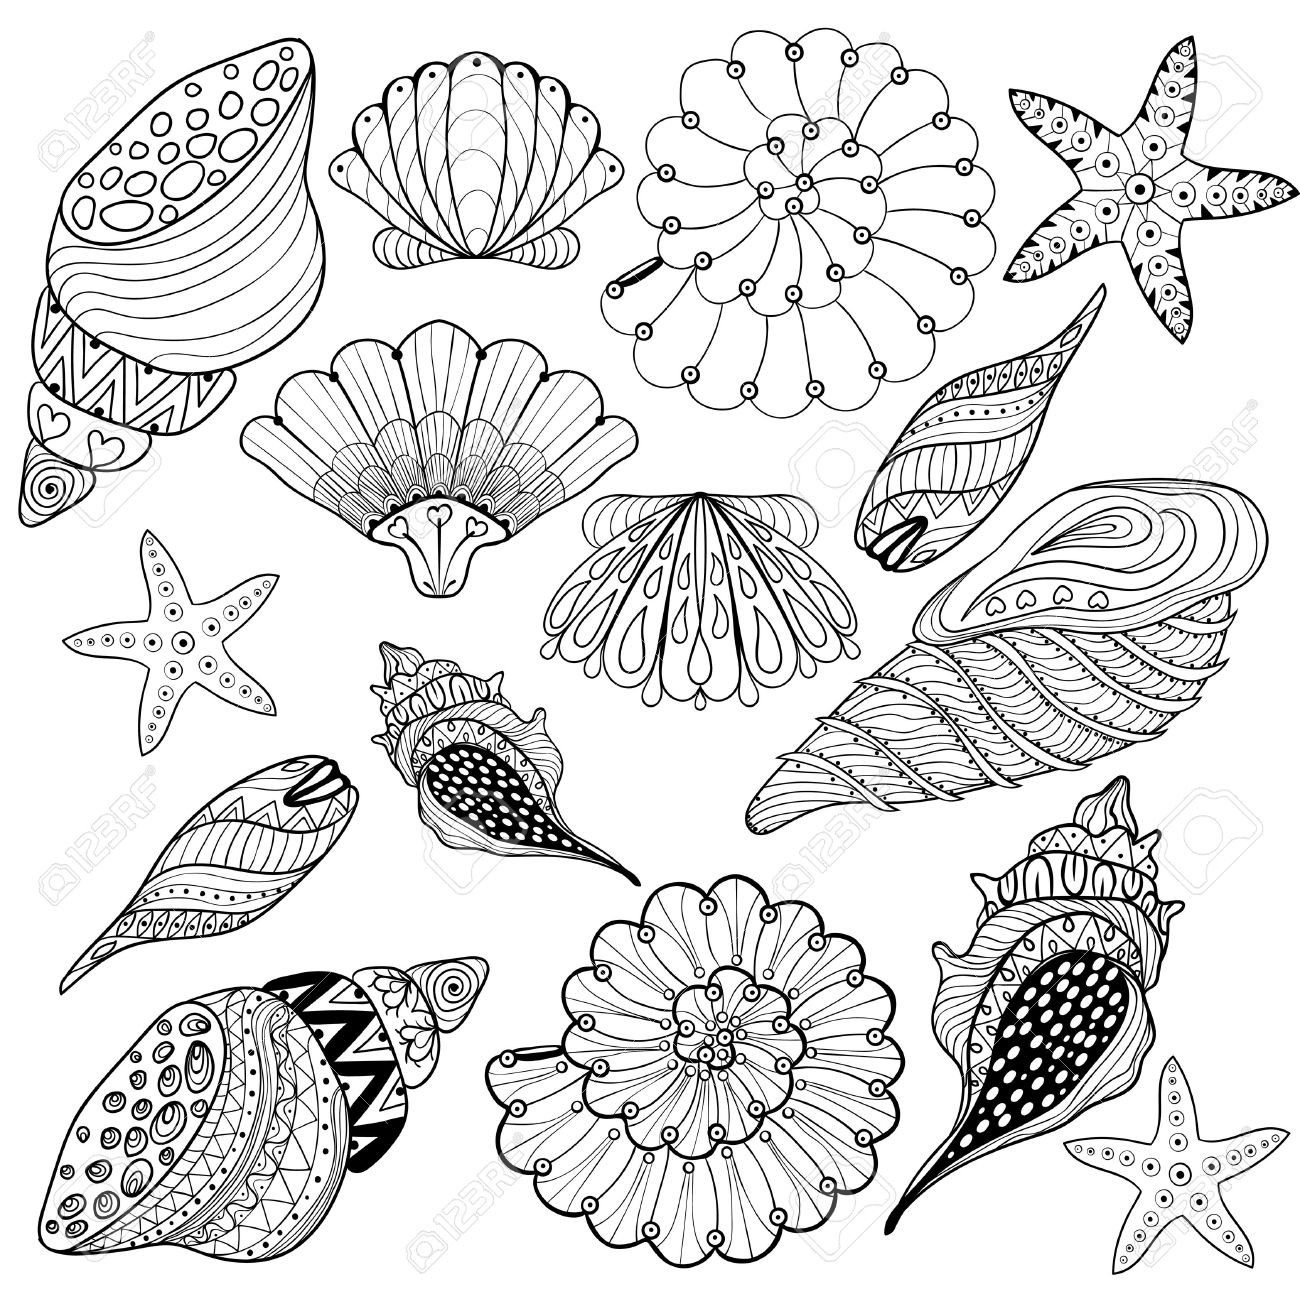 seashell-coloring-page-at-getcolorings-free-printable-colorings